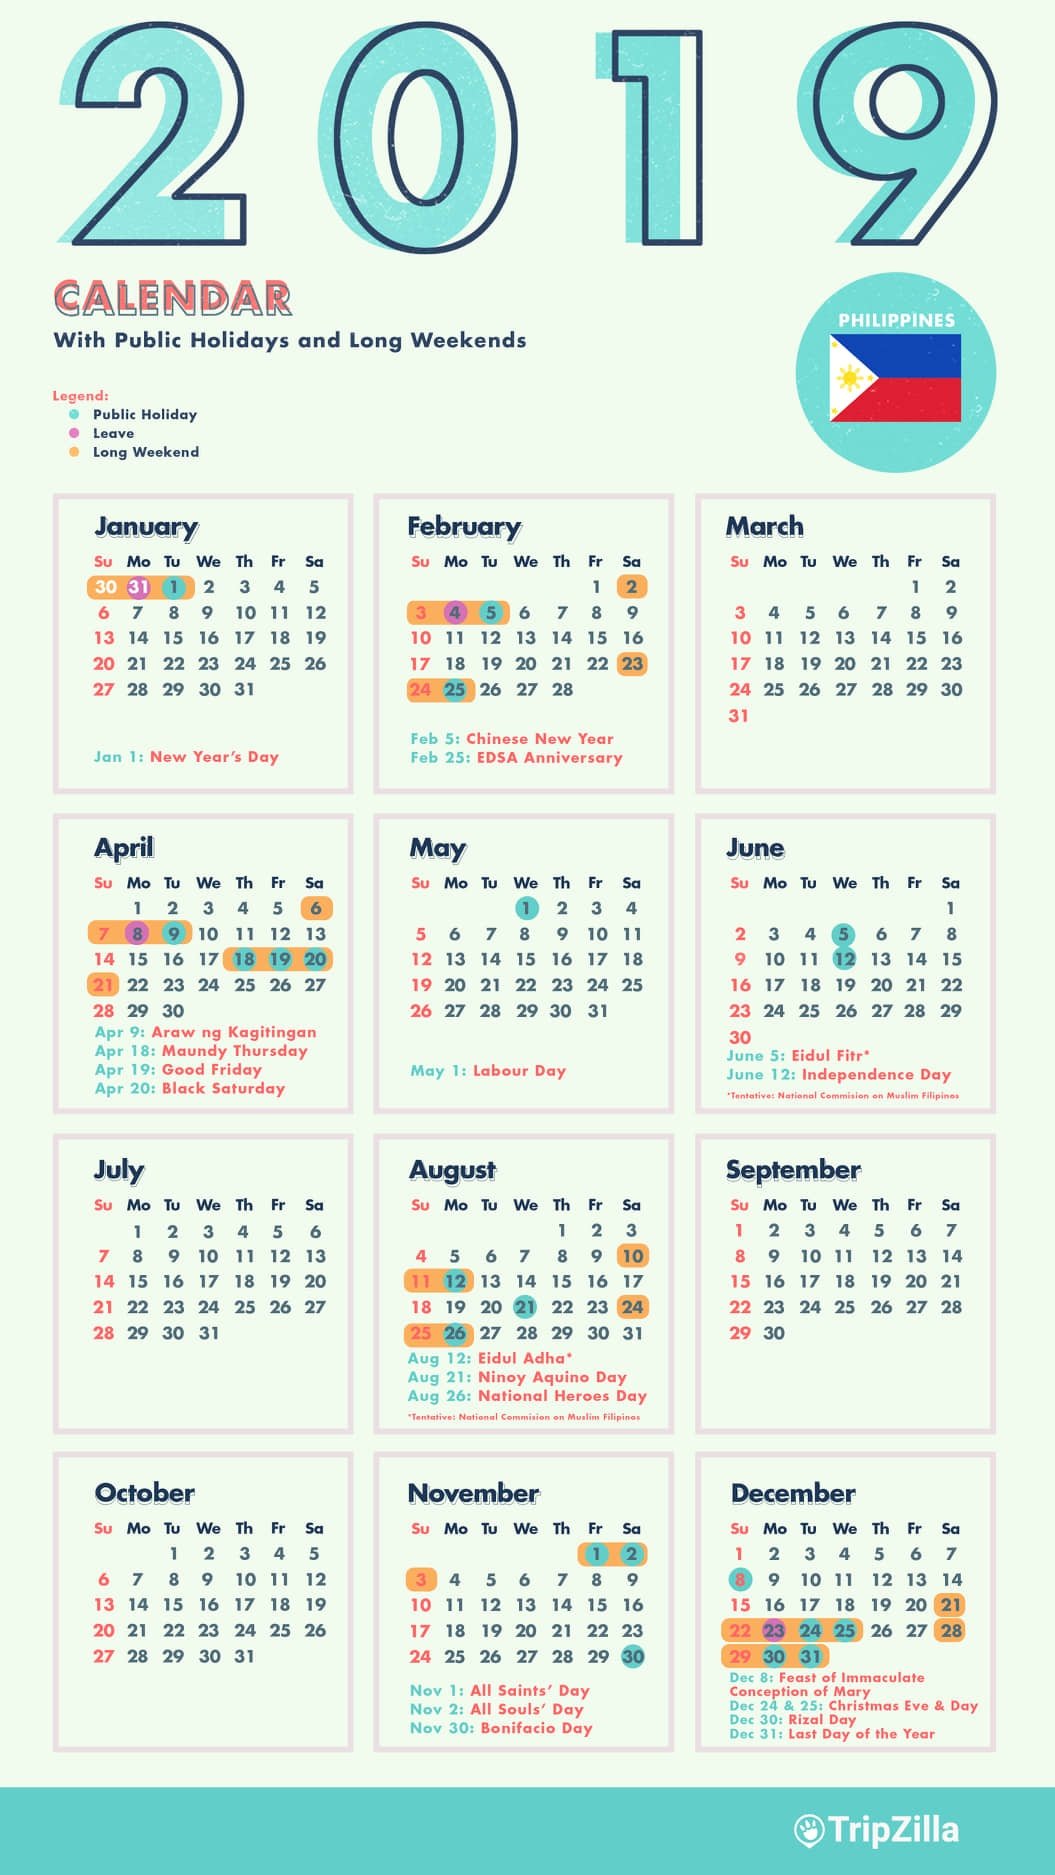 10 Long Weekends in the Philippines in 2019 with Calendar & Cheatsheet